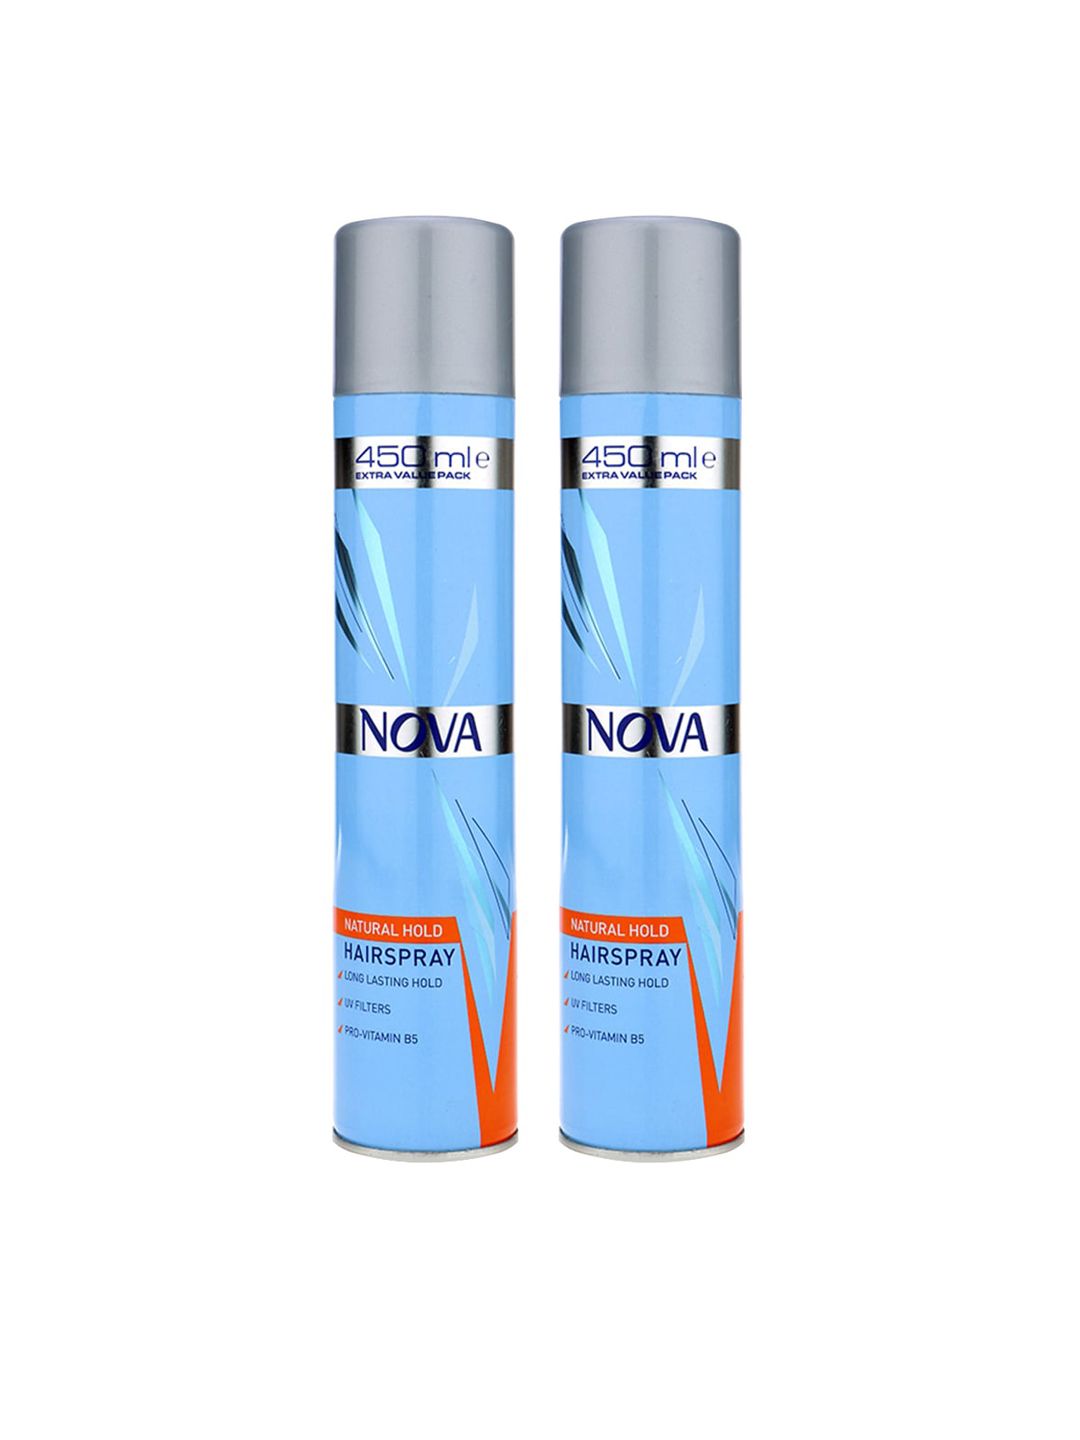 NOVA Unisex Blue Natural Hold Hair Spray, 450ml (Pack of 2) Price in India